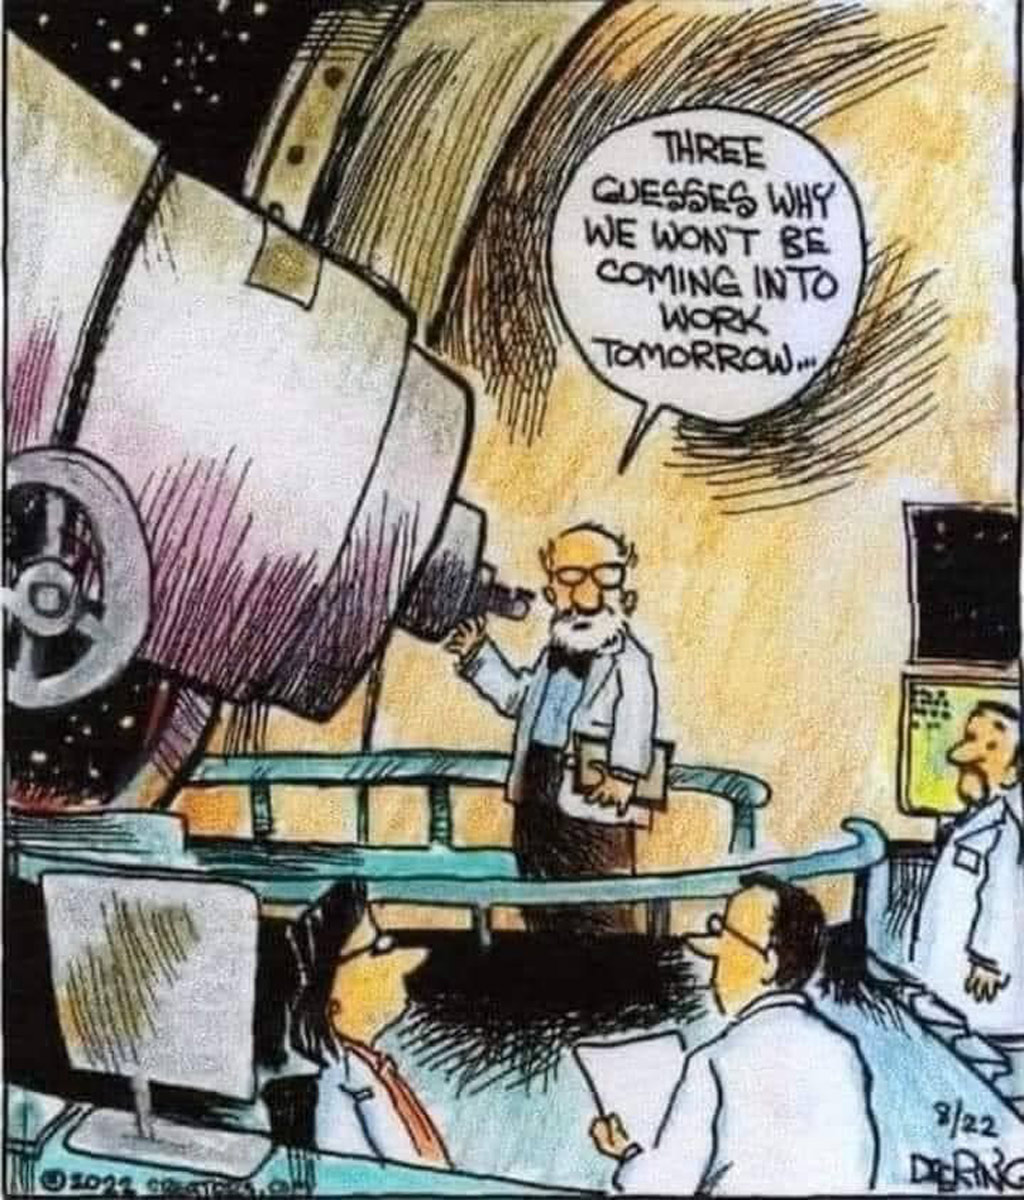 Comic strip of a scientist looking through a giant telescope asking "three guesses why we won't be coming into work tomorrow?"